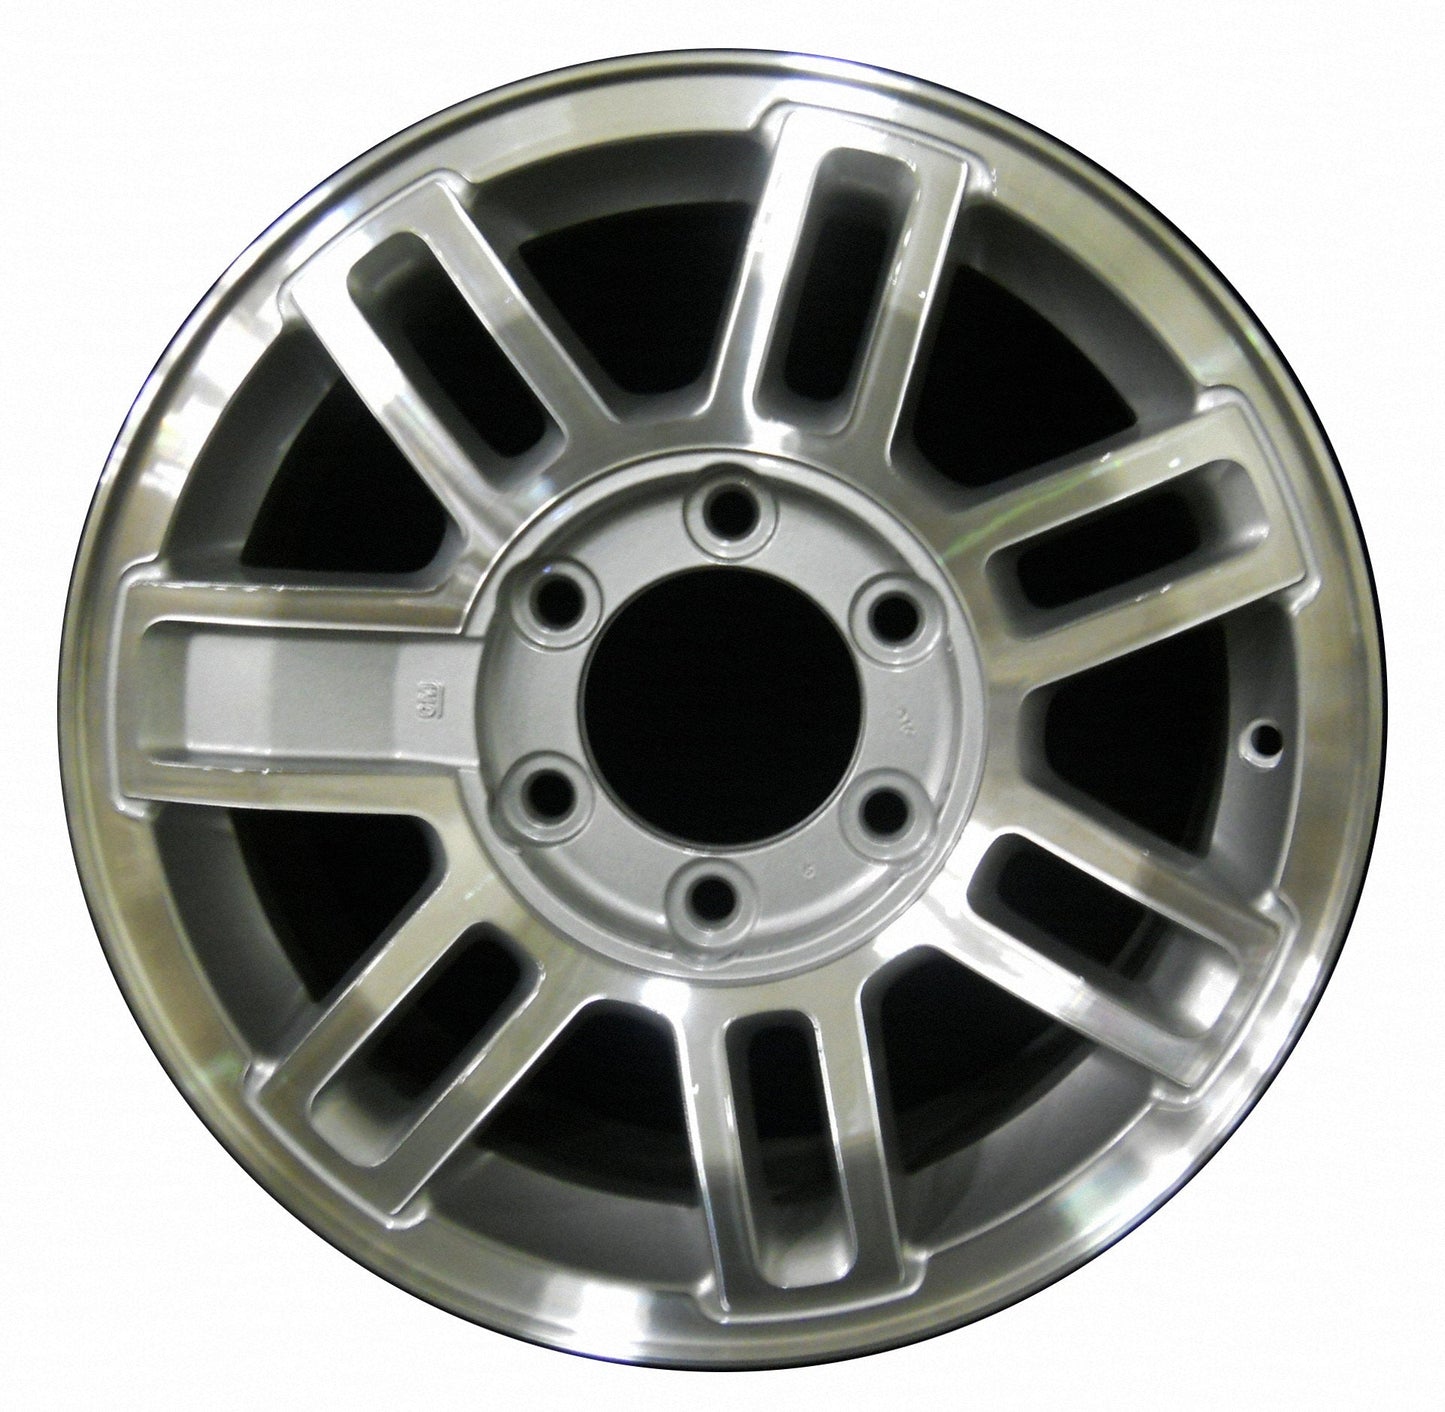 Hummer H3  2006, 2007, 2008, 2009, 2010 Factory OEM Car Wheel Size 16x7.5 Alloy WAO.6304.PS02.MA